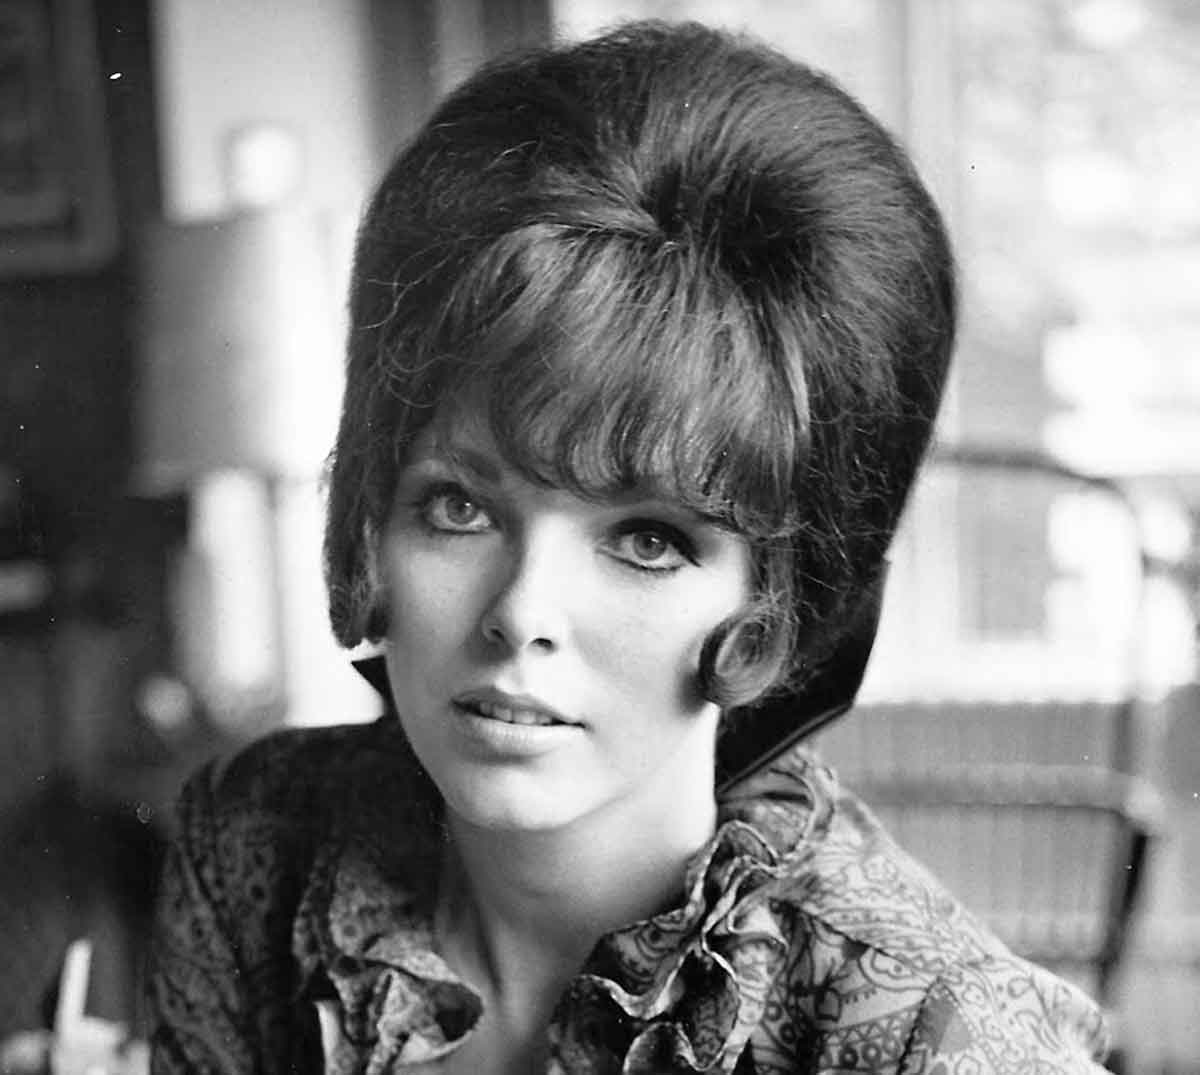 Can You Name These Retro Hairstyles? Beehive